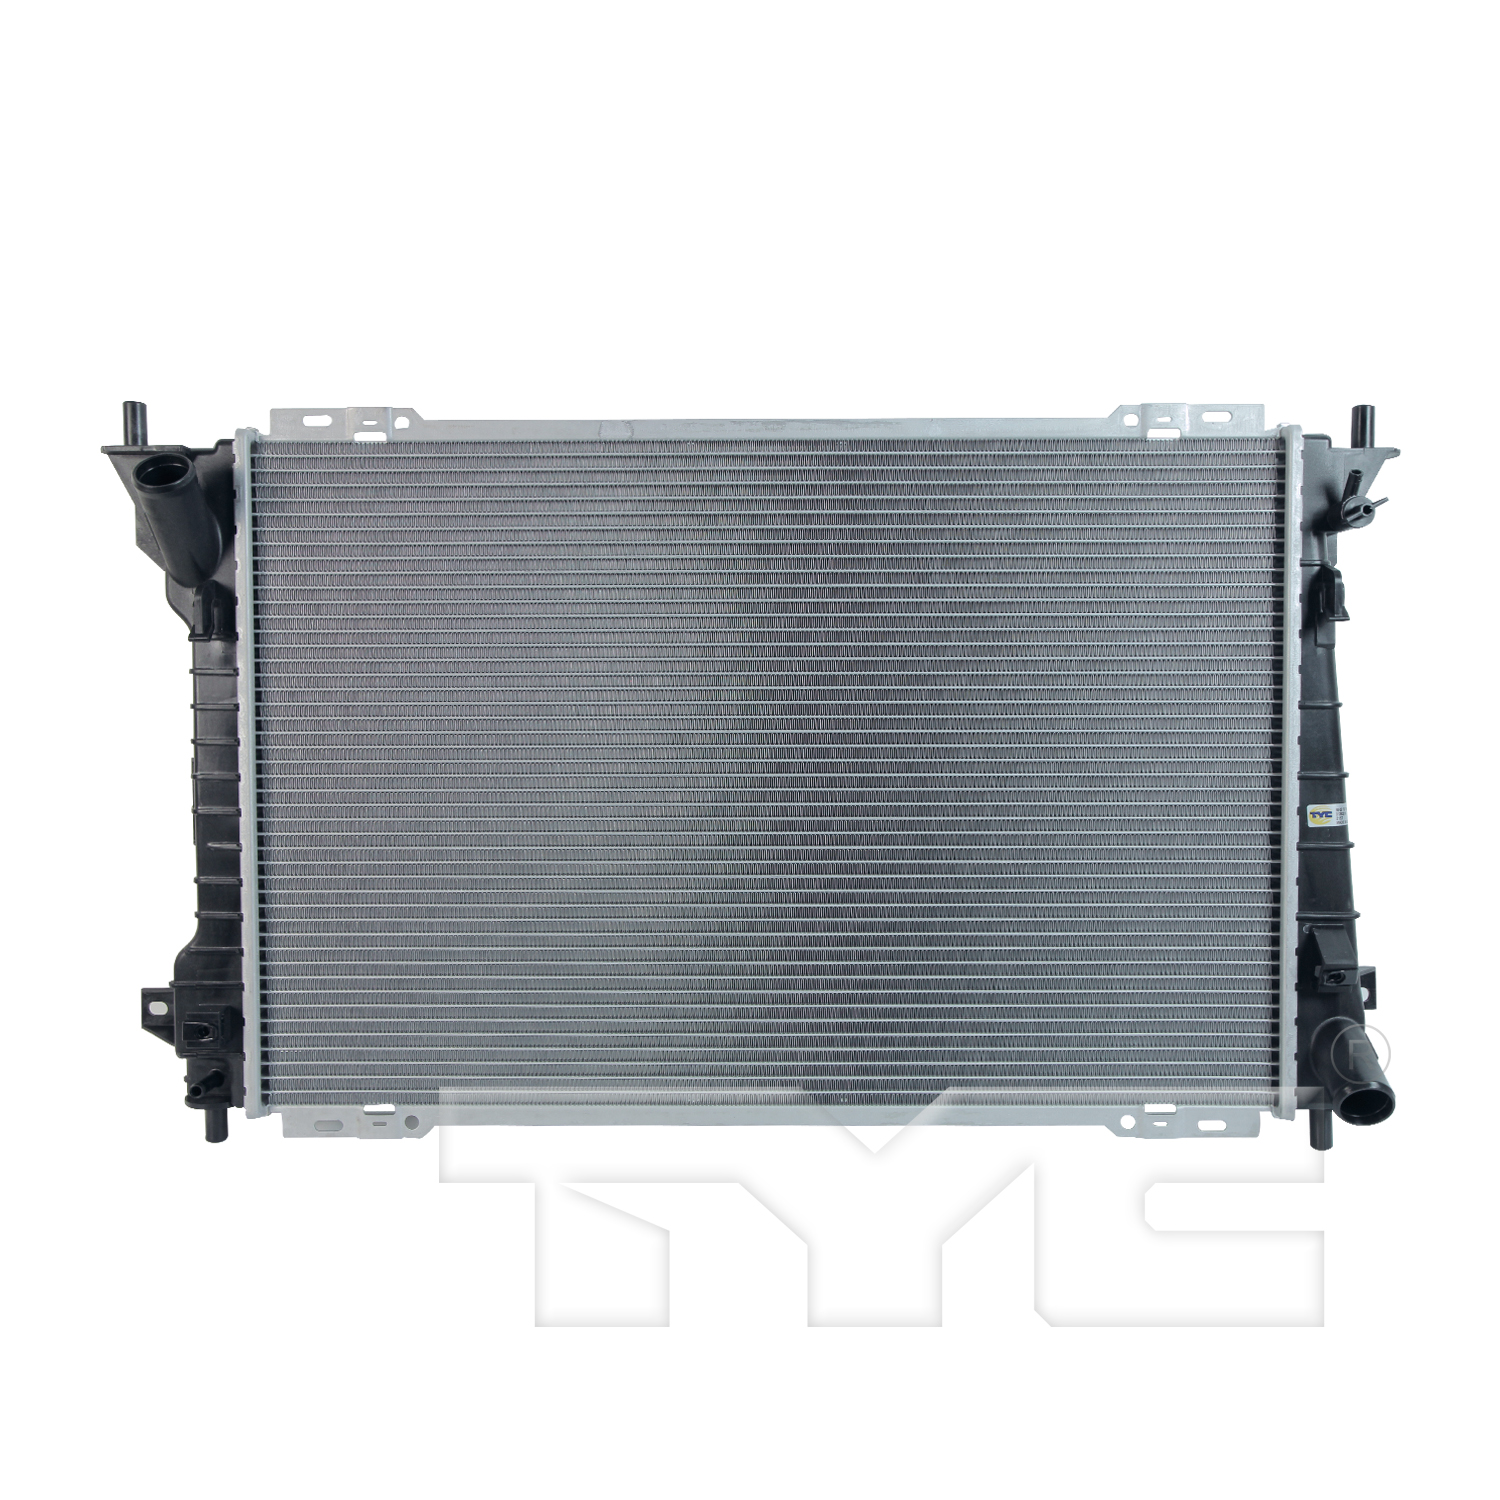 Aftermarket RADIATORS for FORD - CROWN VICTORIA, CROWN VICTORIA,98-02,Radiator assembly